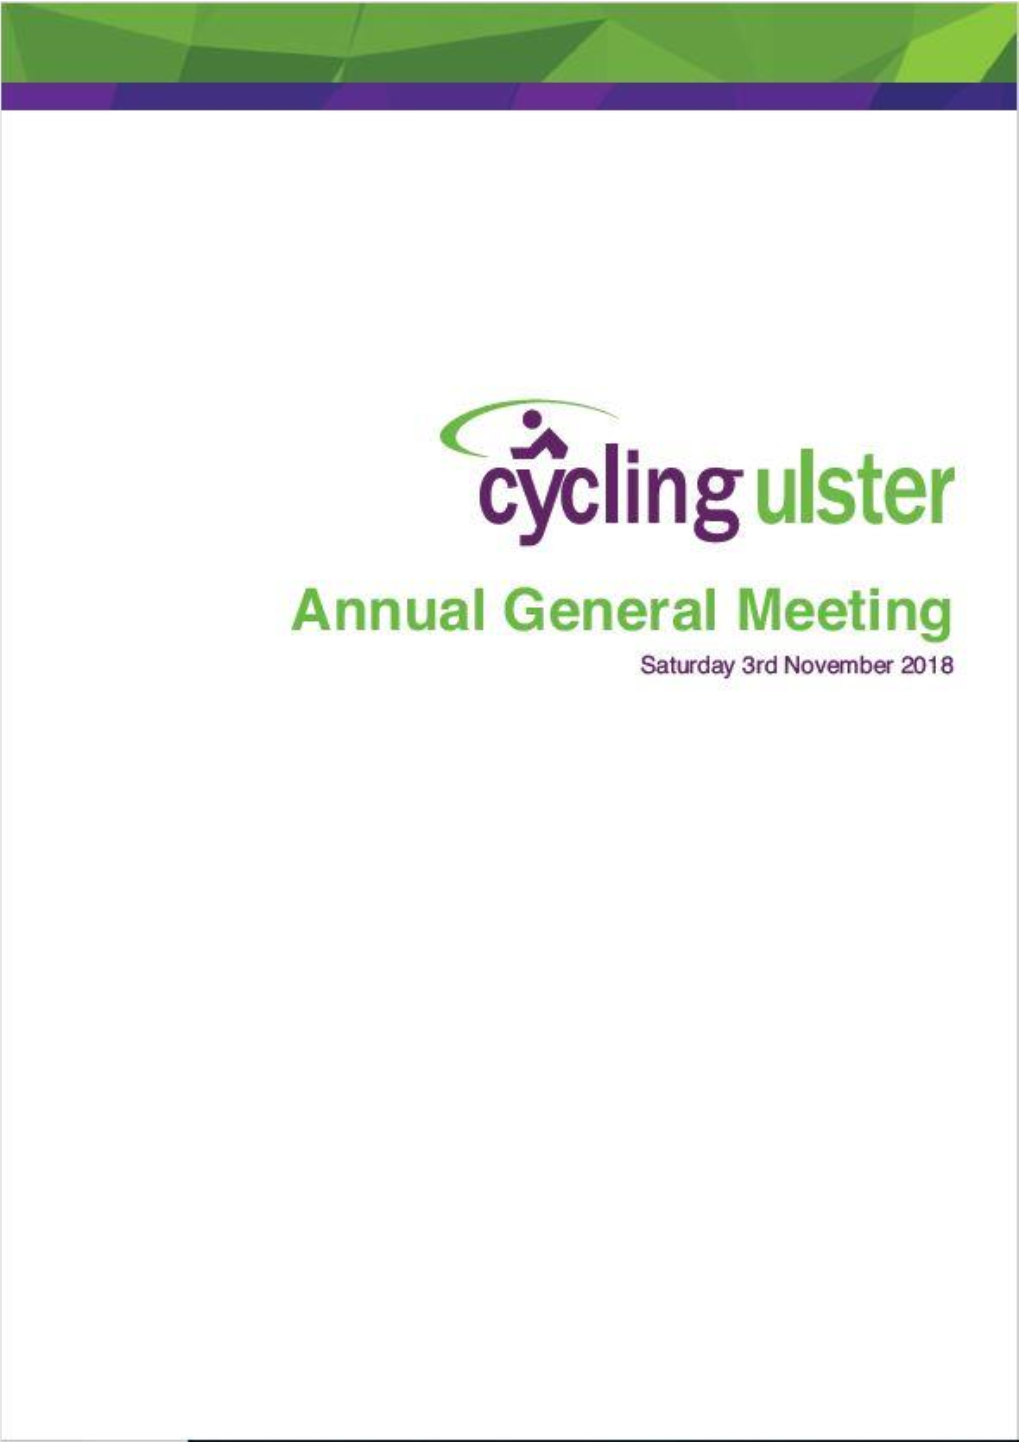 Cycling Ulster AGM 2018